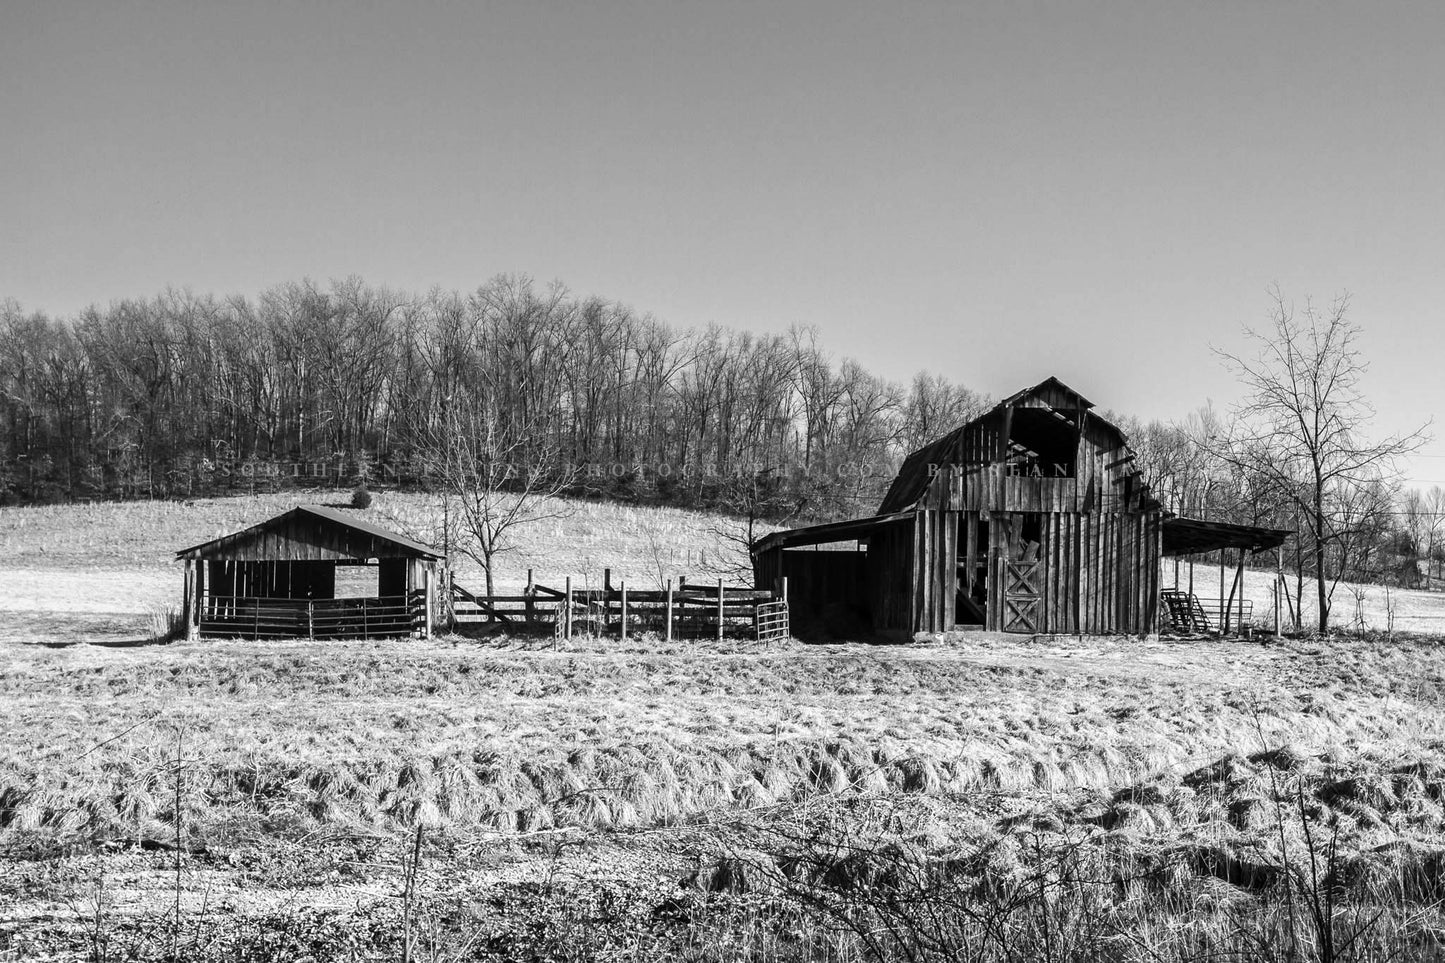 Black and white country photography print of a old wooden barn and pen on a late winter day in the Ozark Mountains of Arkansas by Sean Ramsey of Southern Plains Photography.